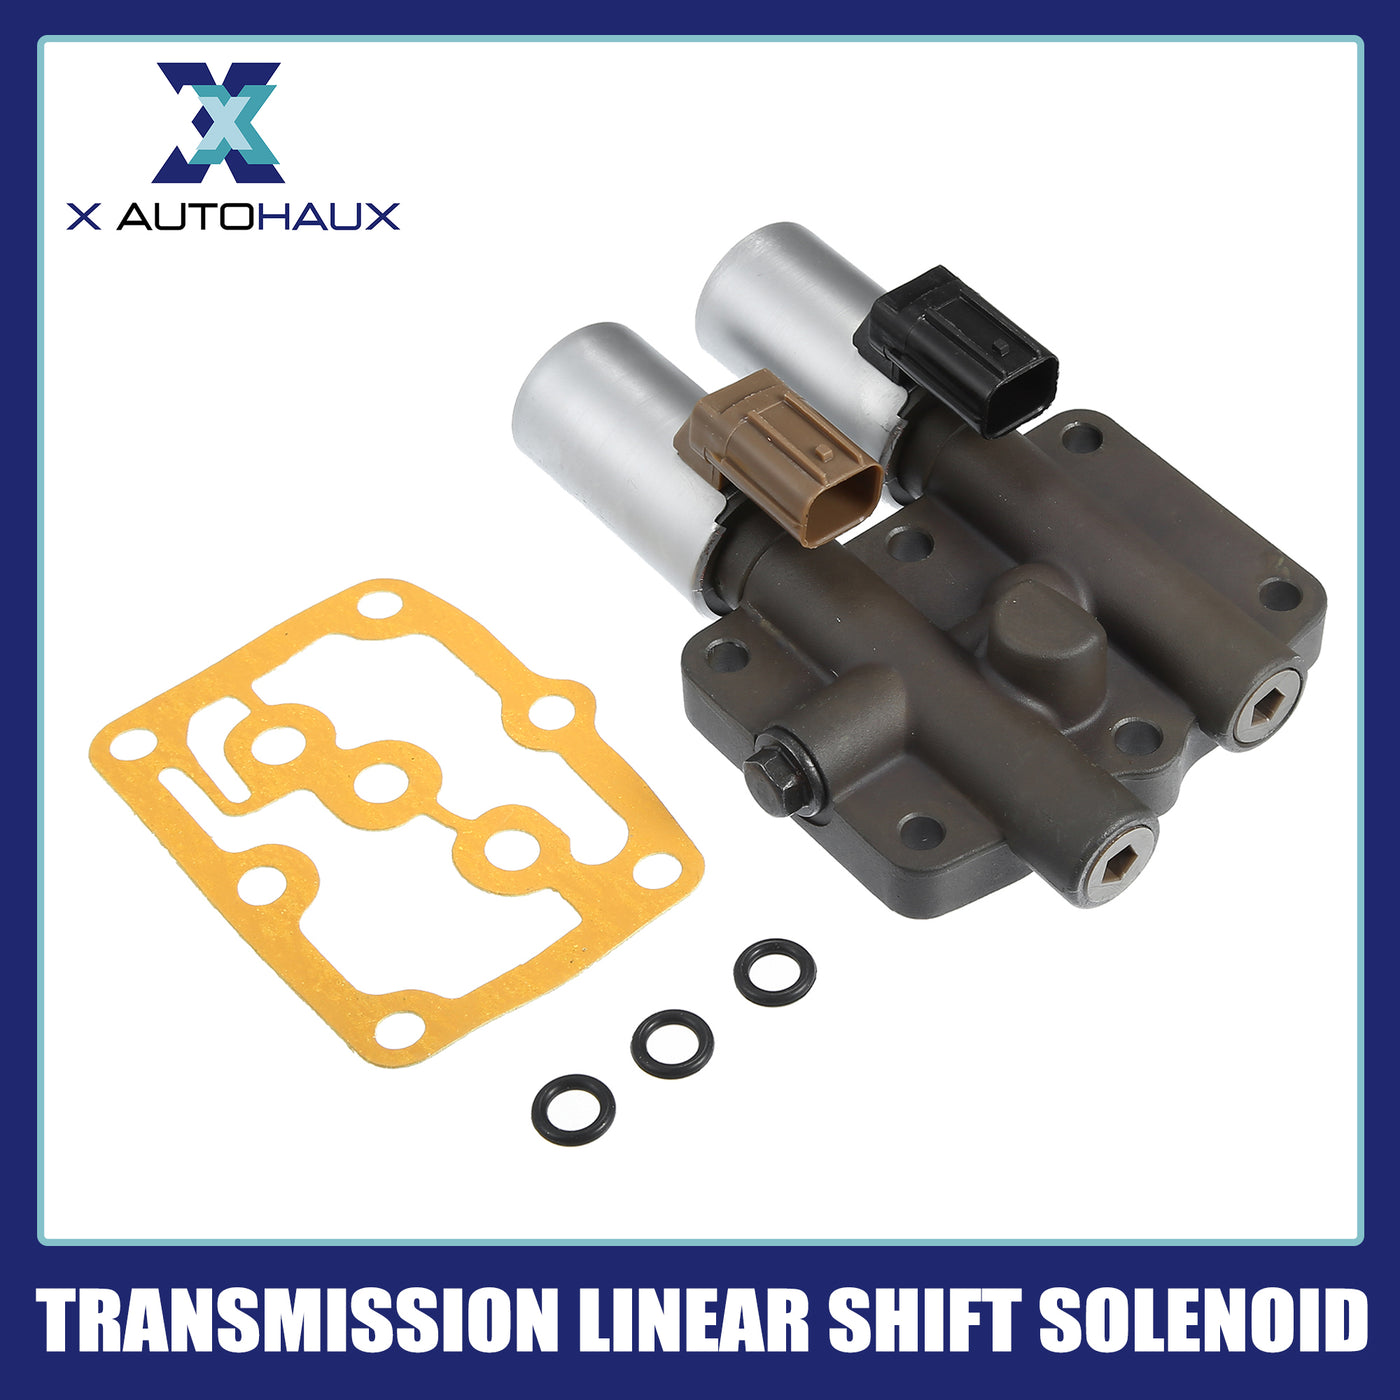 Motoforti Transmission Dual Linear Shift Solenoid, Automatic Transmission Shift Solenoid, for Honda Accord 1998-2007, Iron Plastic, with Gasket, 28250P6H024, Dark Gray Silver Tone, 1 Set